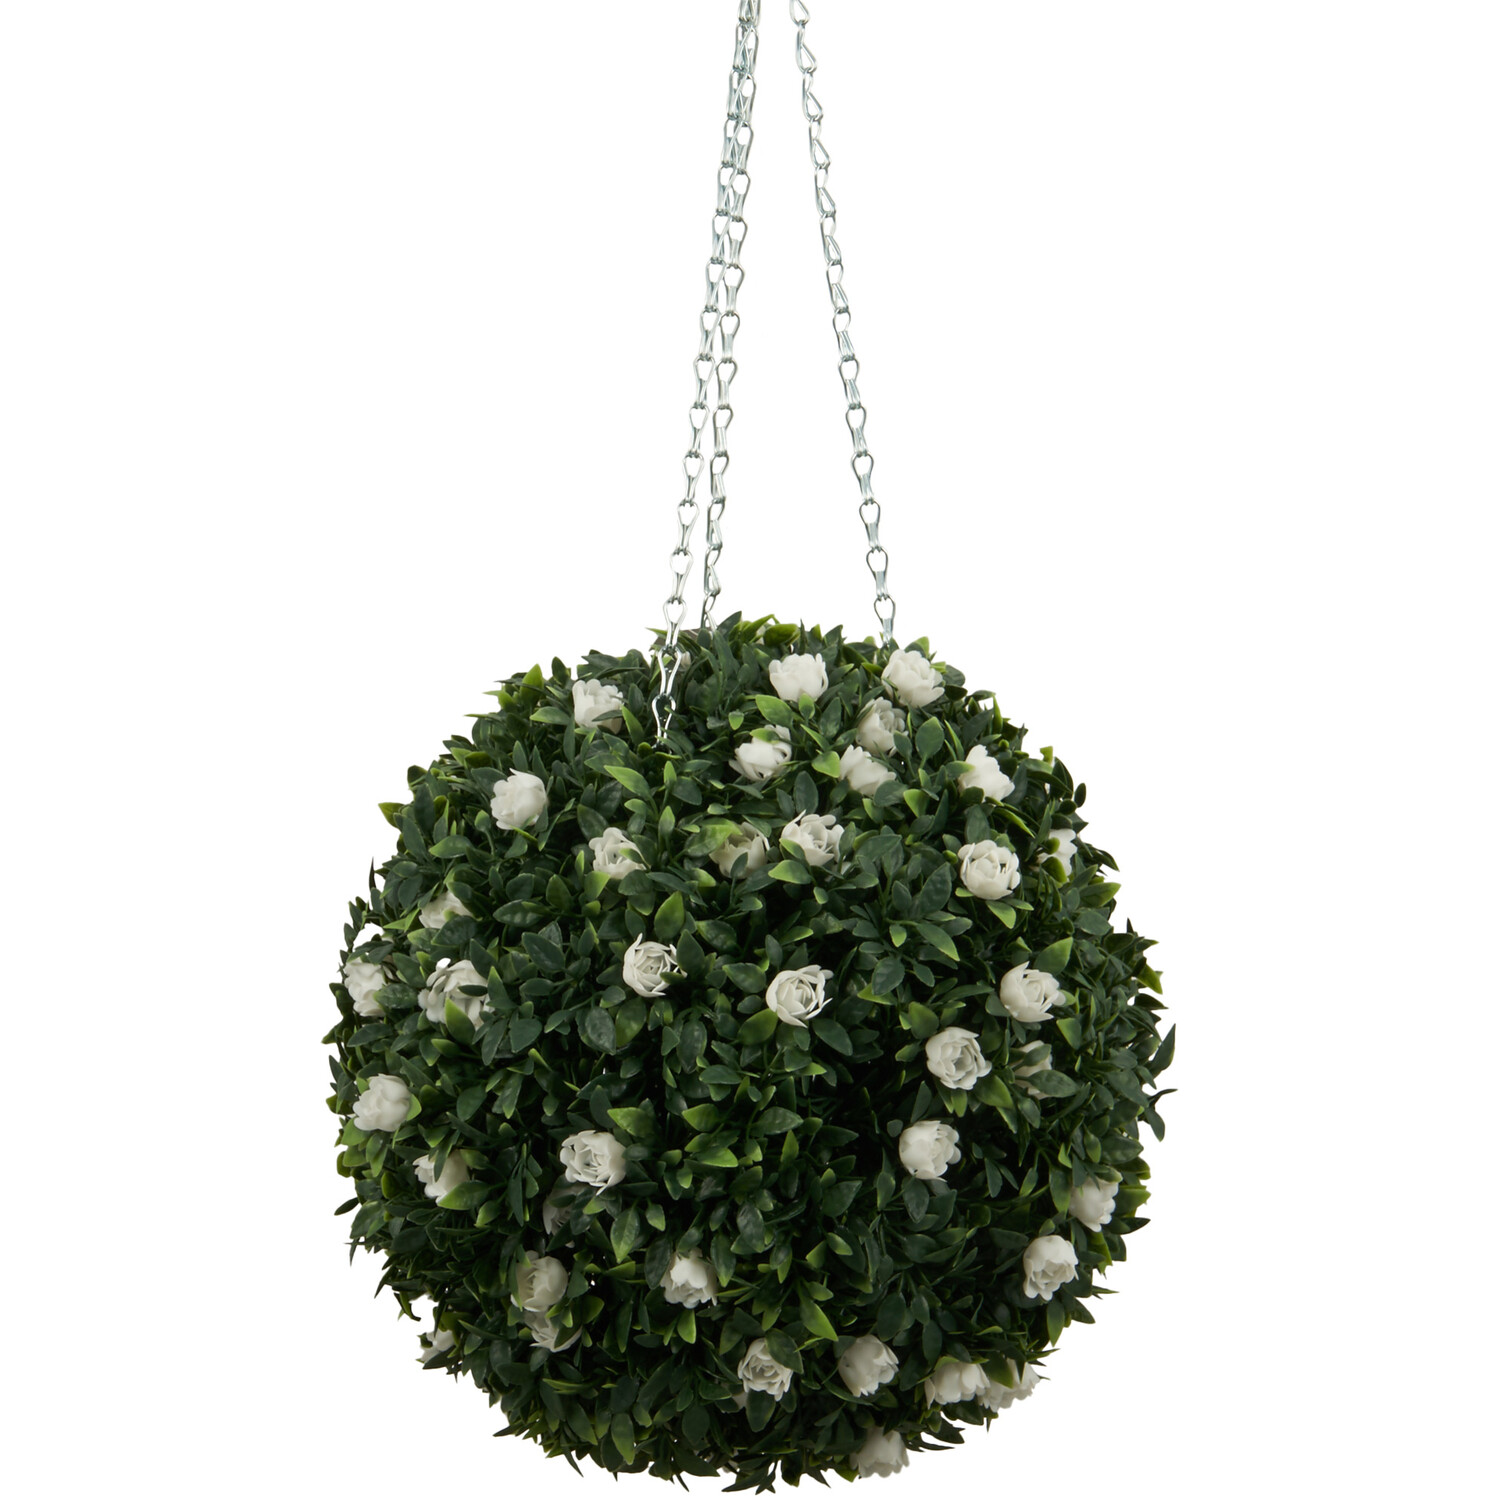 Boxwood Ball with Flowers - Green Image 1